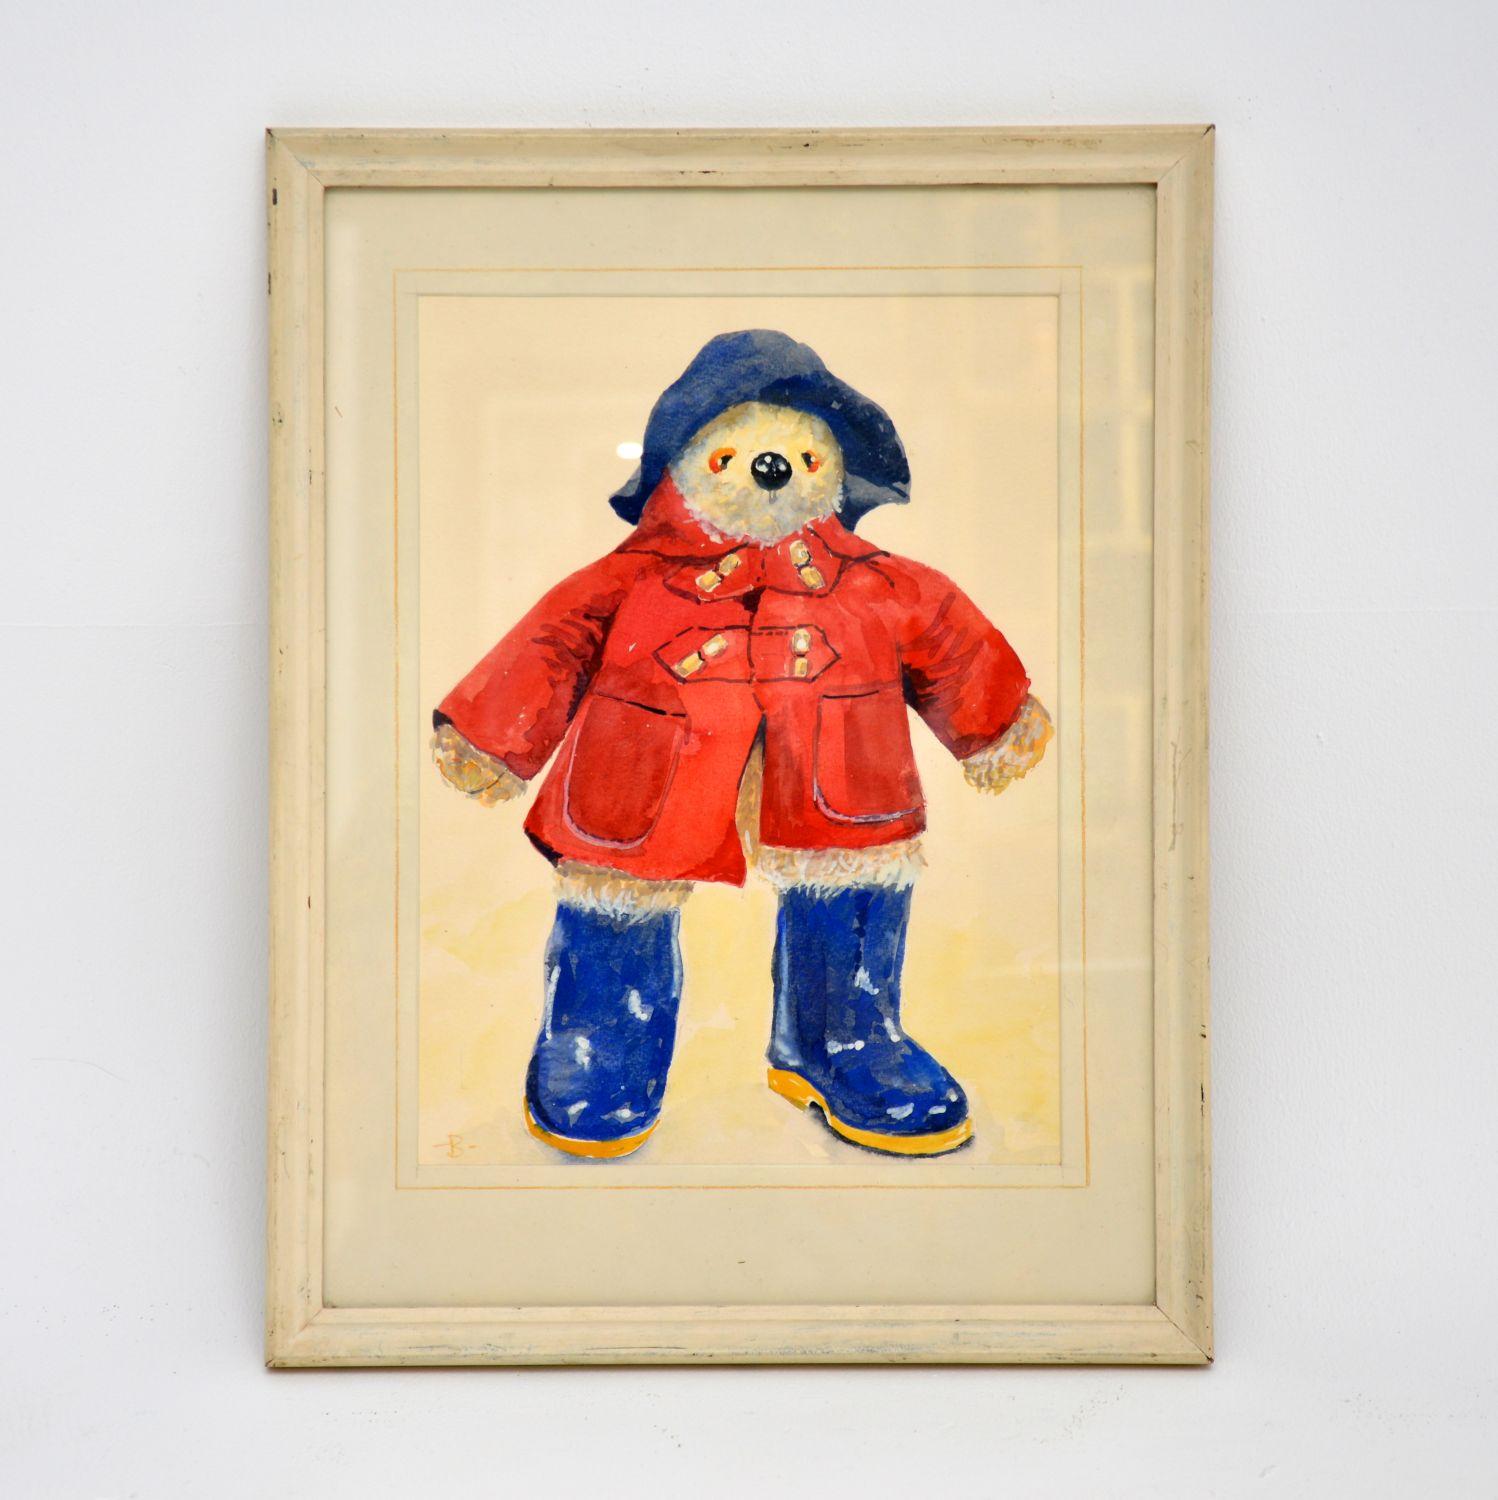 A charming and beautiful original water colour painting of Paddington Bear. This is by the artist Hazel Bromiley & dates from around the 1960-1970’s period.

This is a wonderful subject and is a beautifully executed painting. It’s also nicely